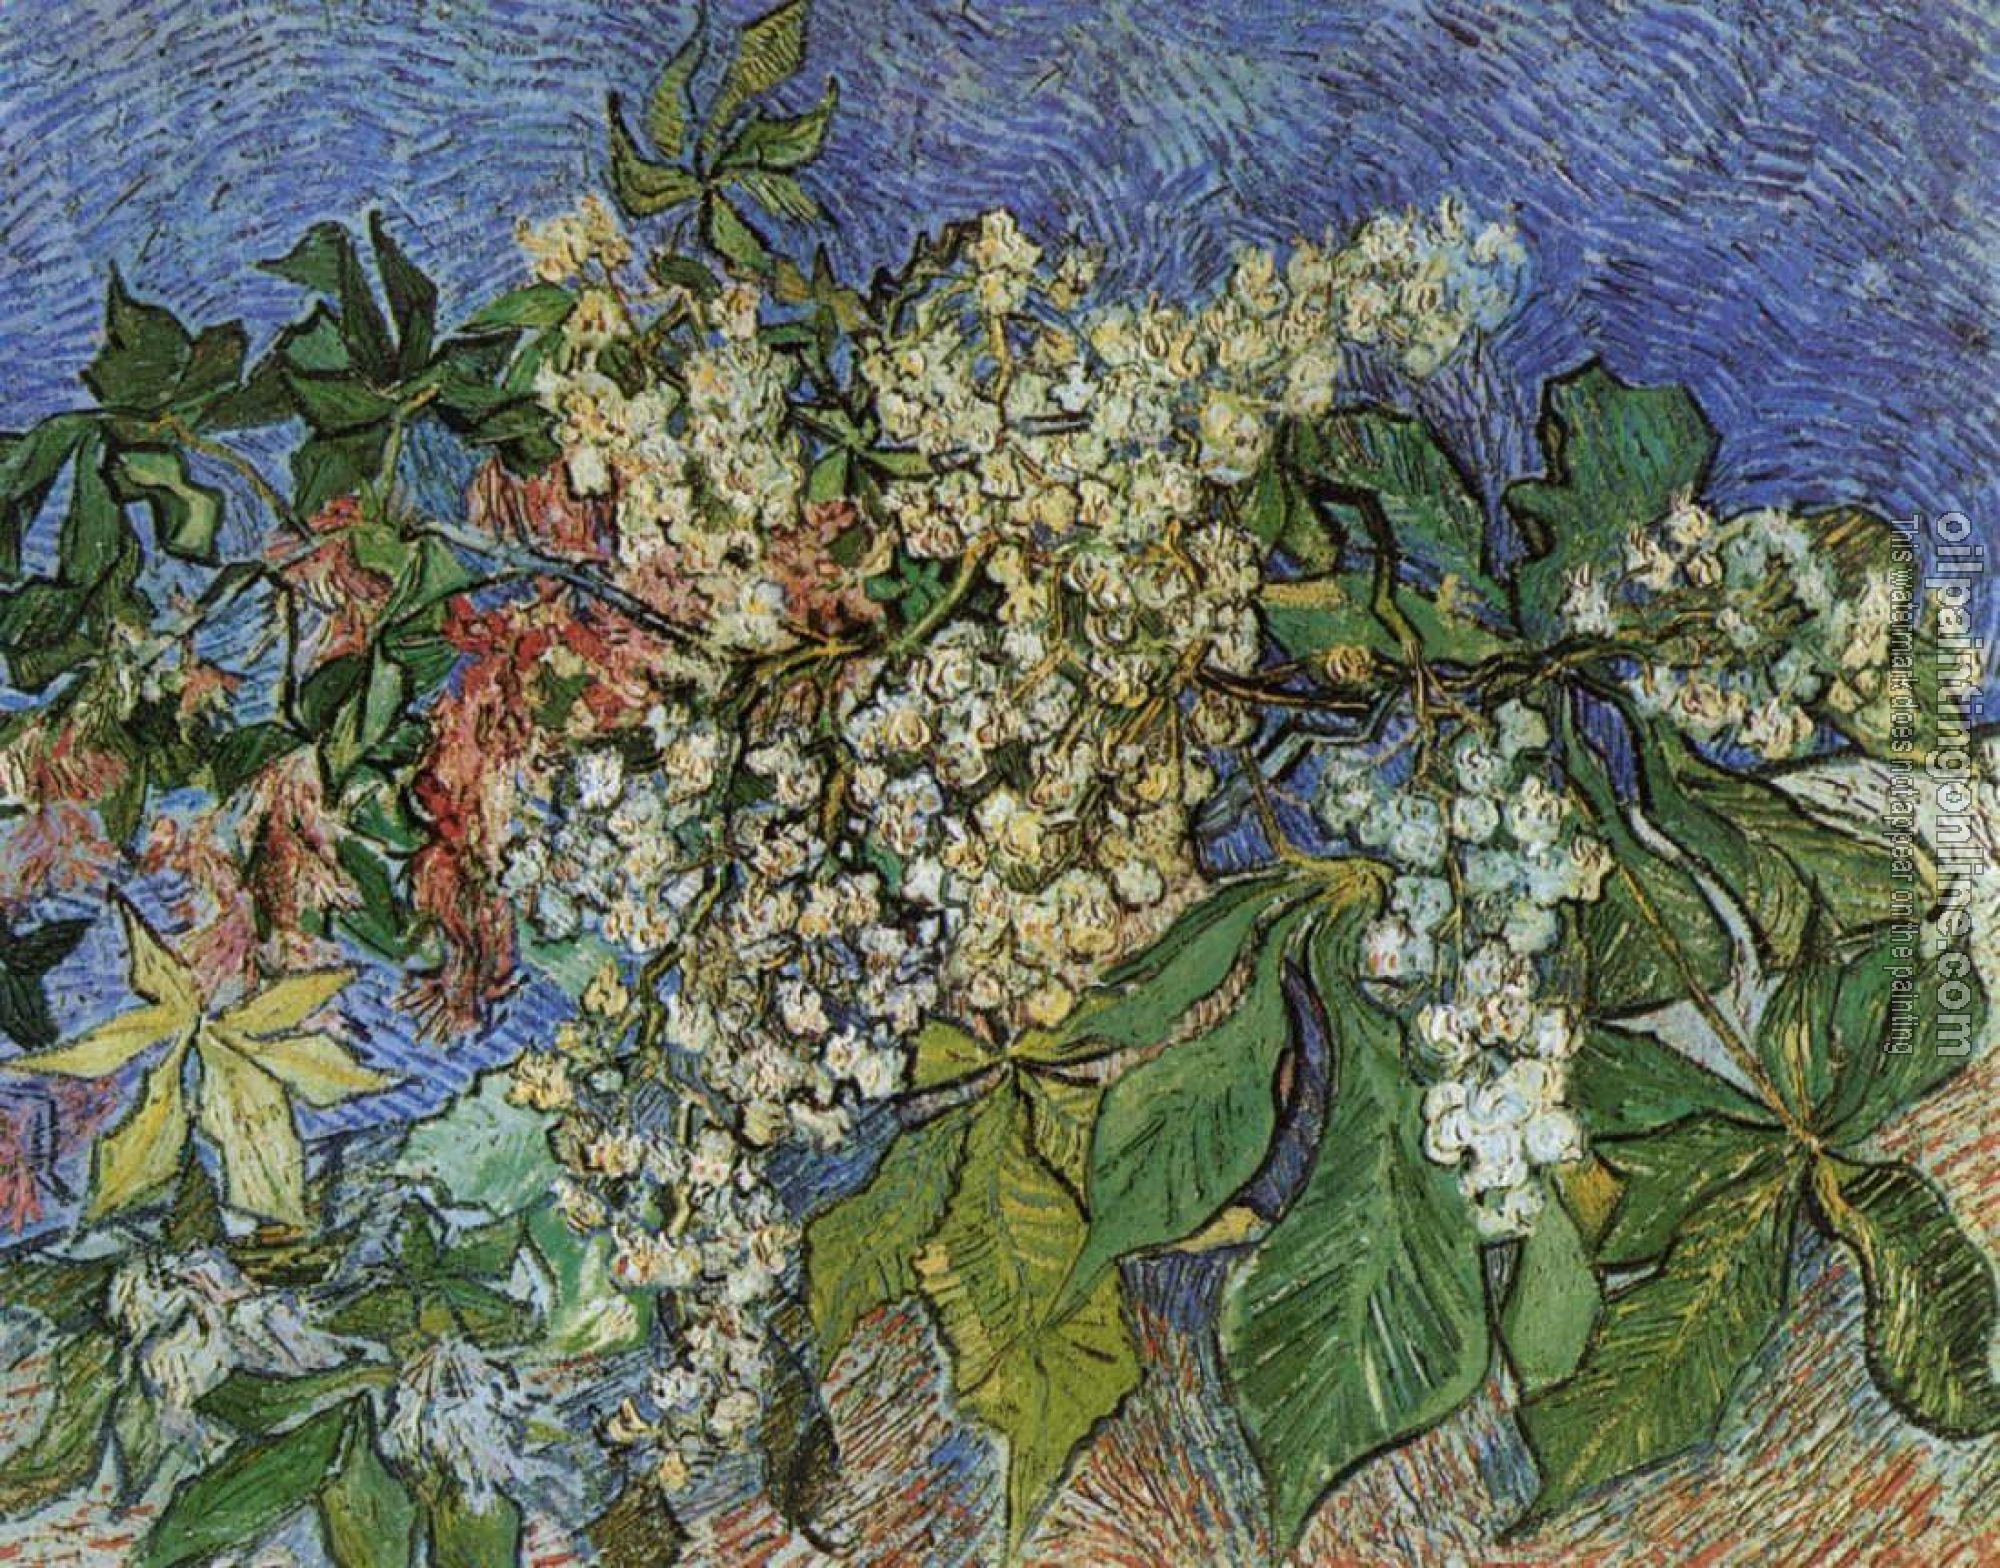 Gogh, Vincent van - Blossoming Chestnut Branches